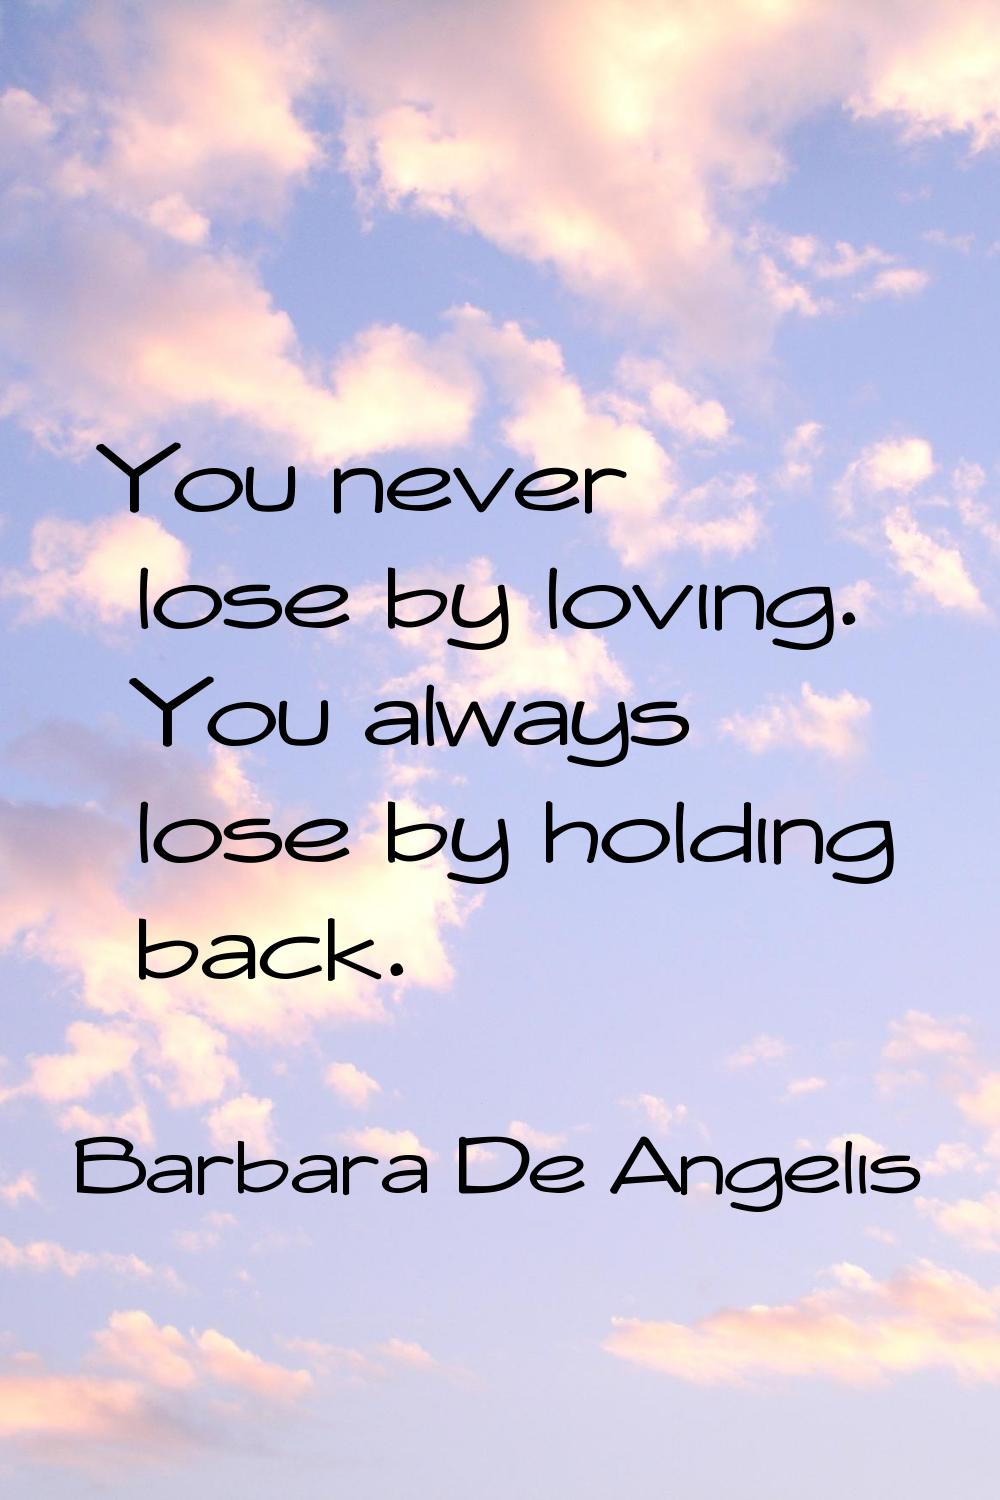 You never lose by loving. You always lose by holding back.